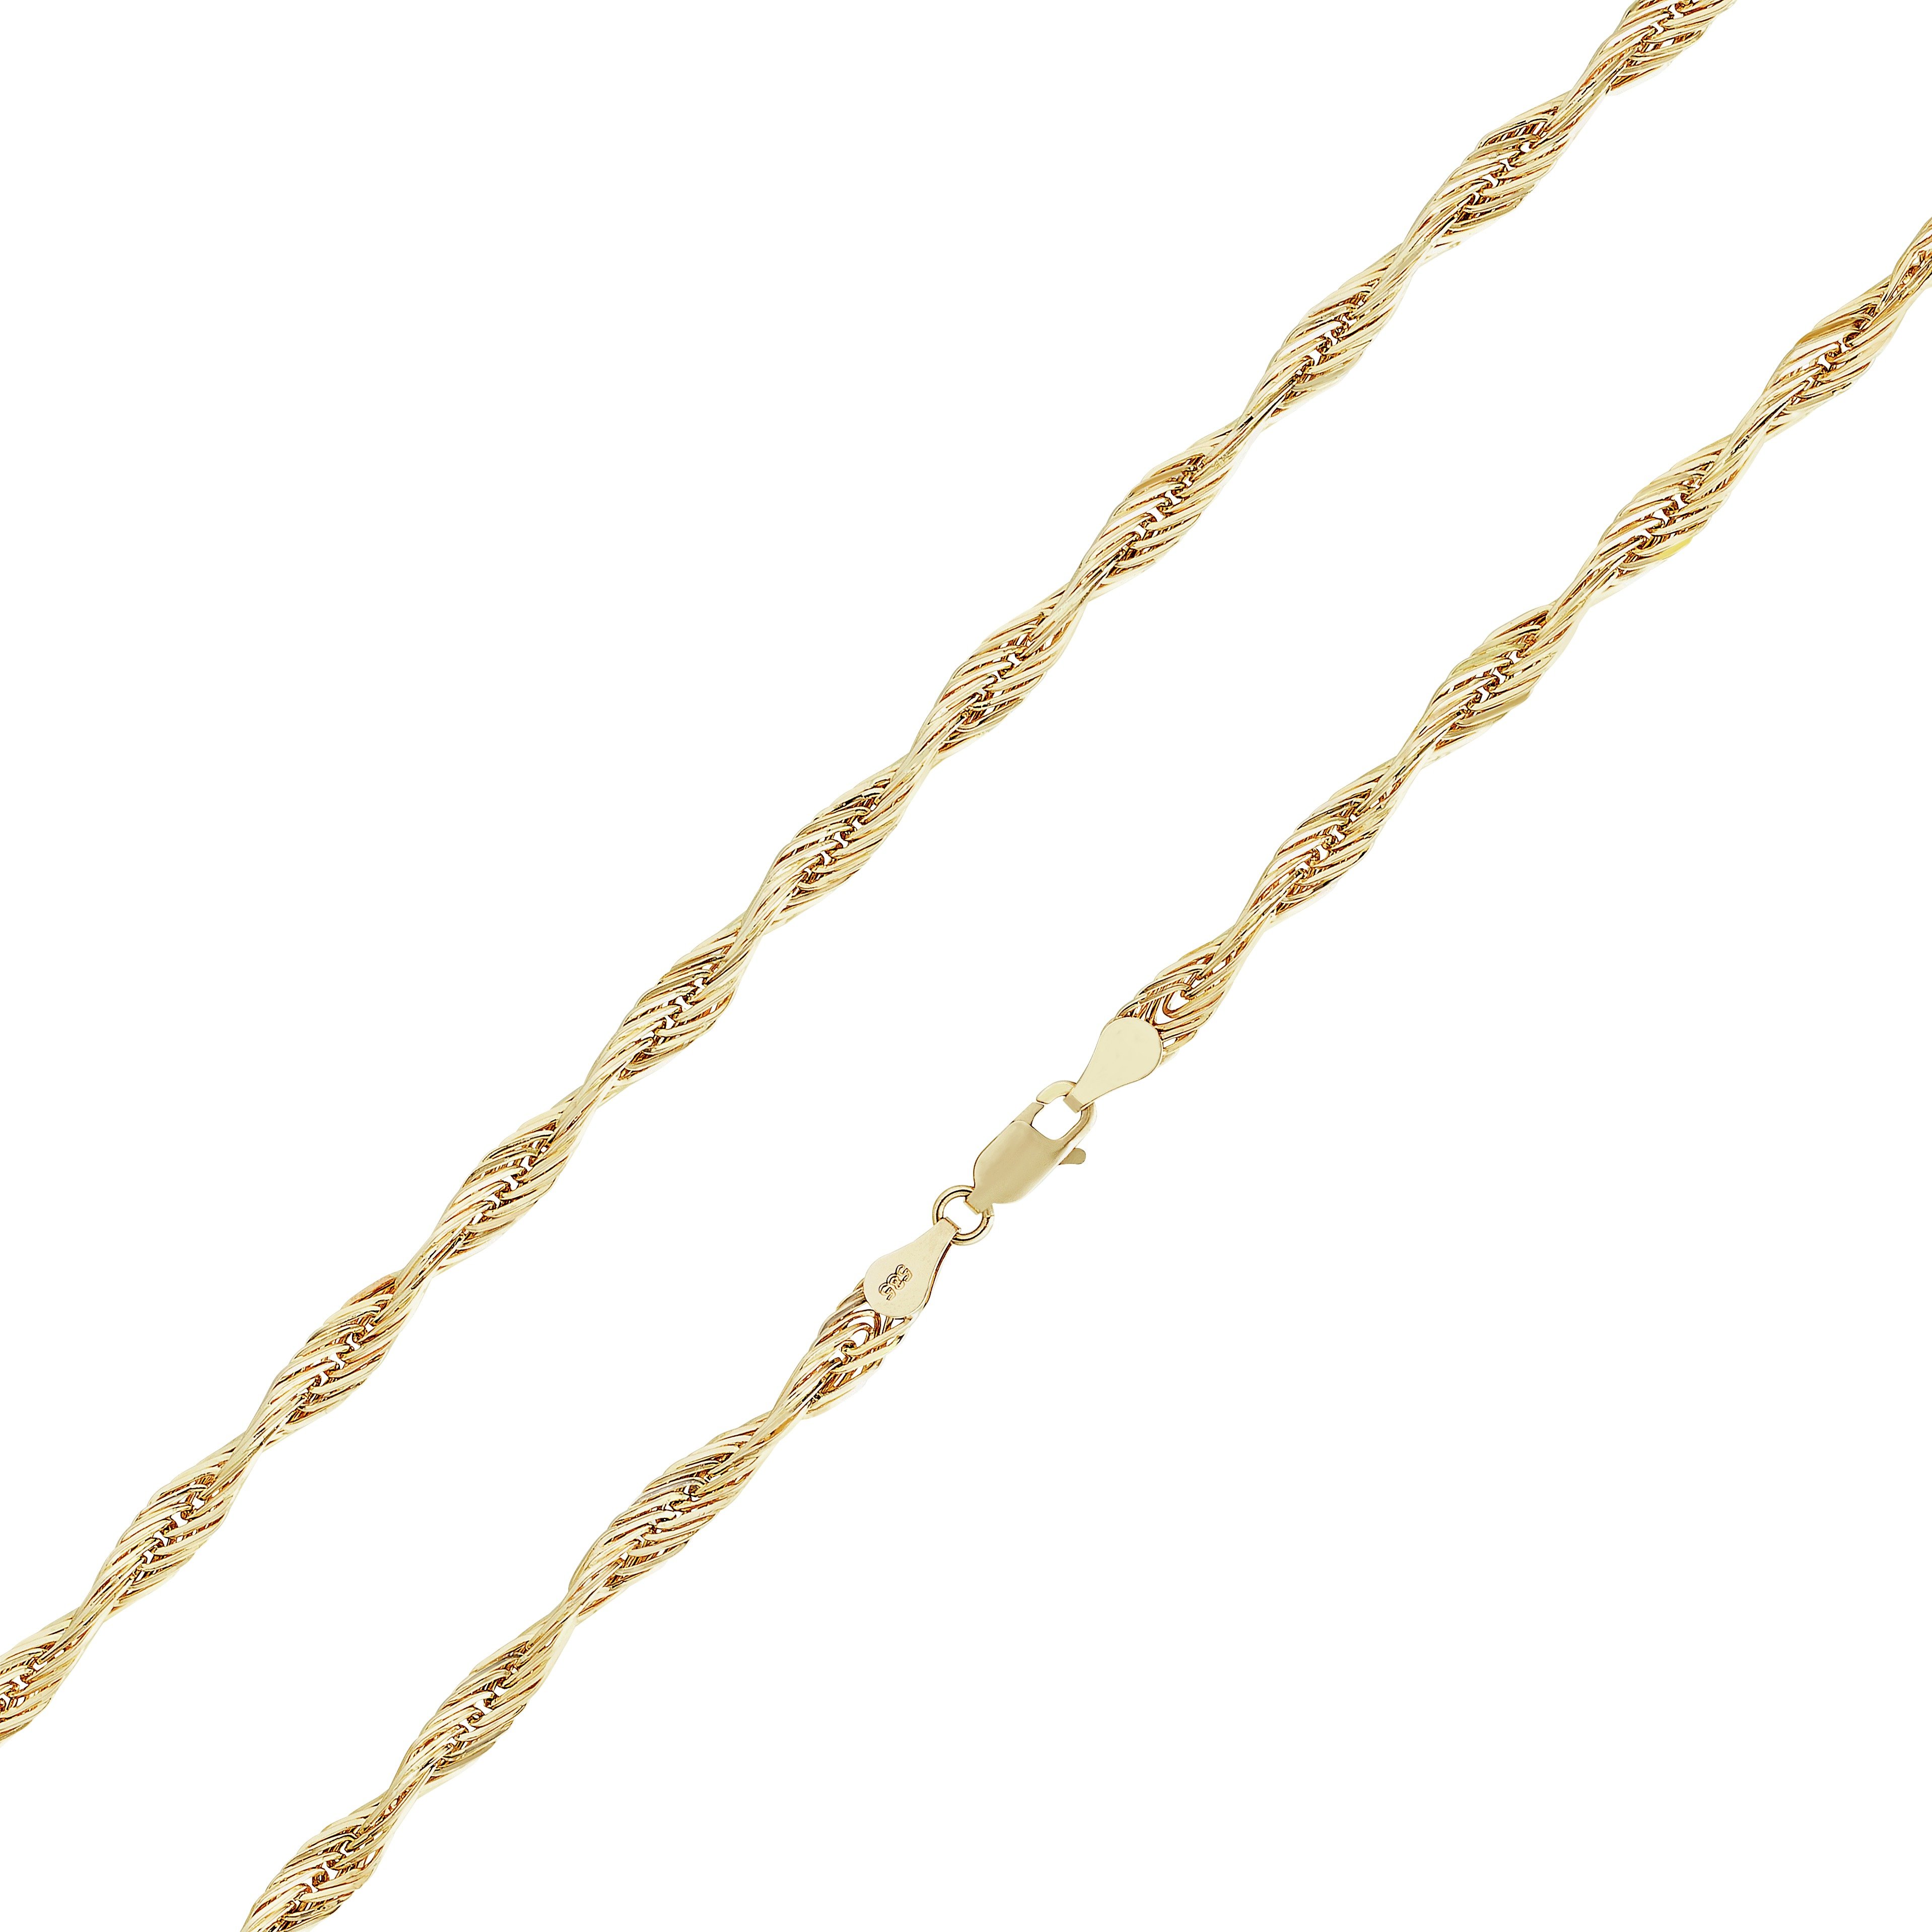 Revere 9ct Gold Twist Design Chain 18 Inch Necklace Review